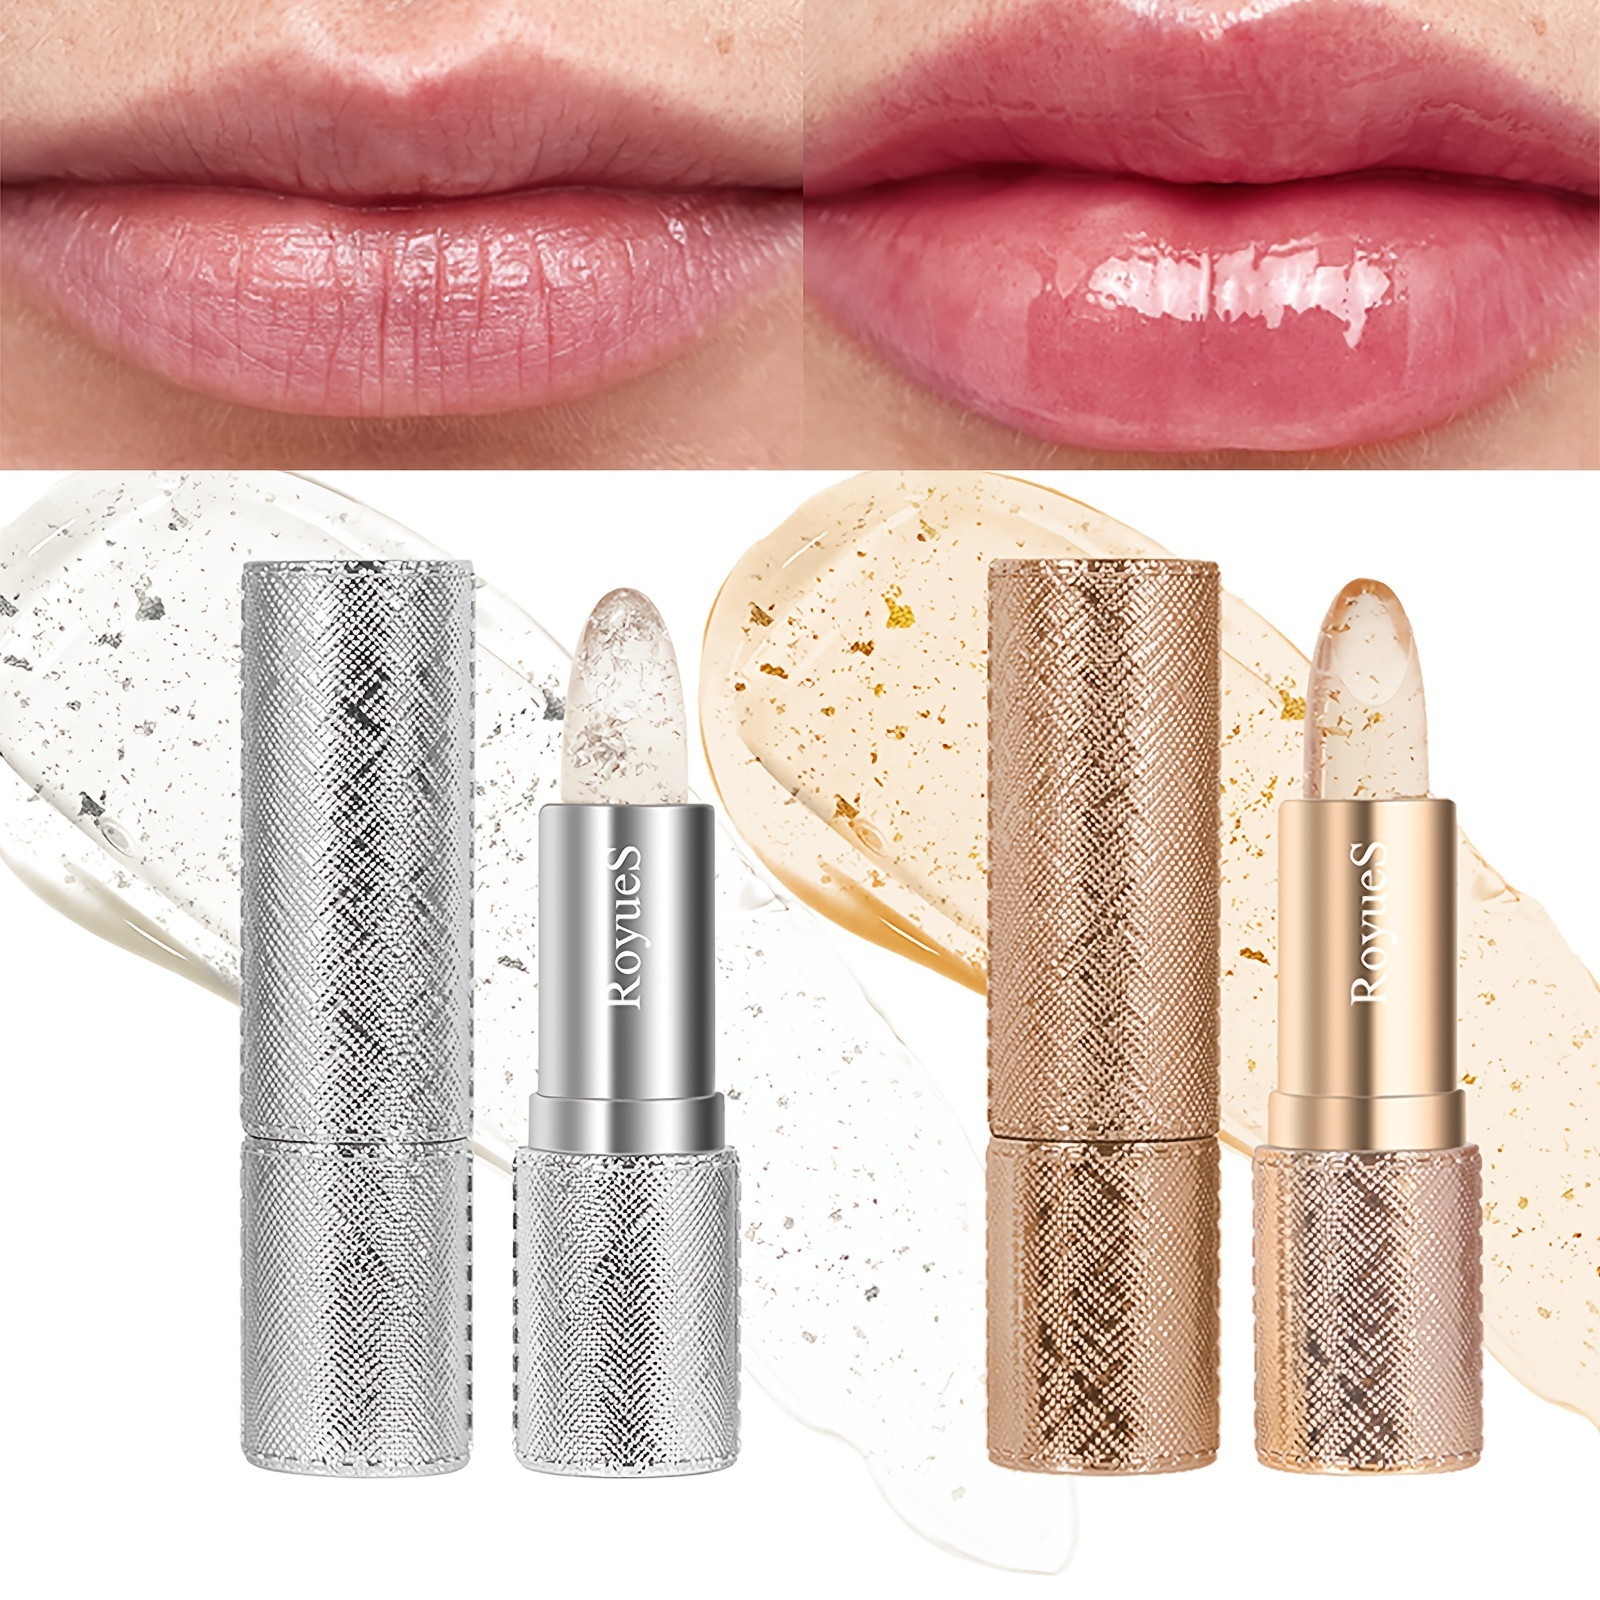 25 Best Lip Balms for Dry and Chapped Lips of 2023